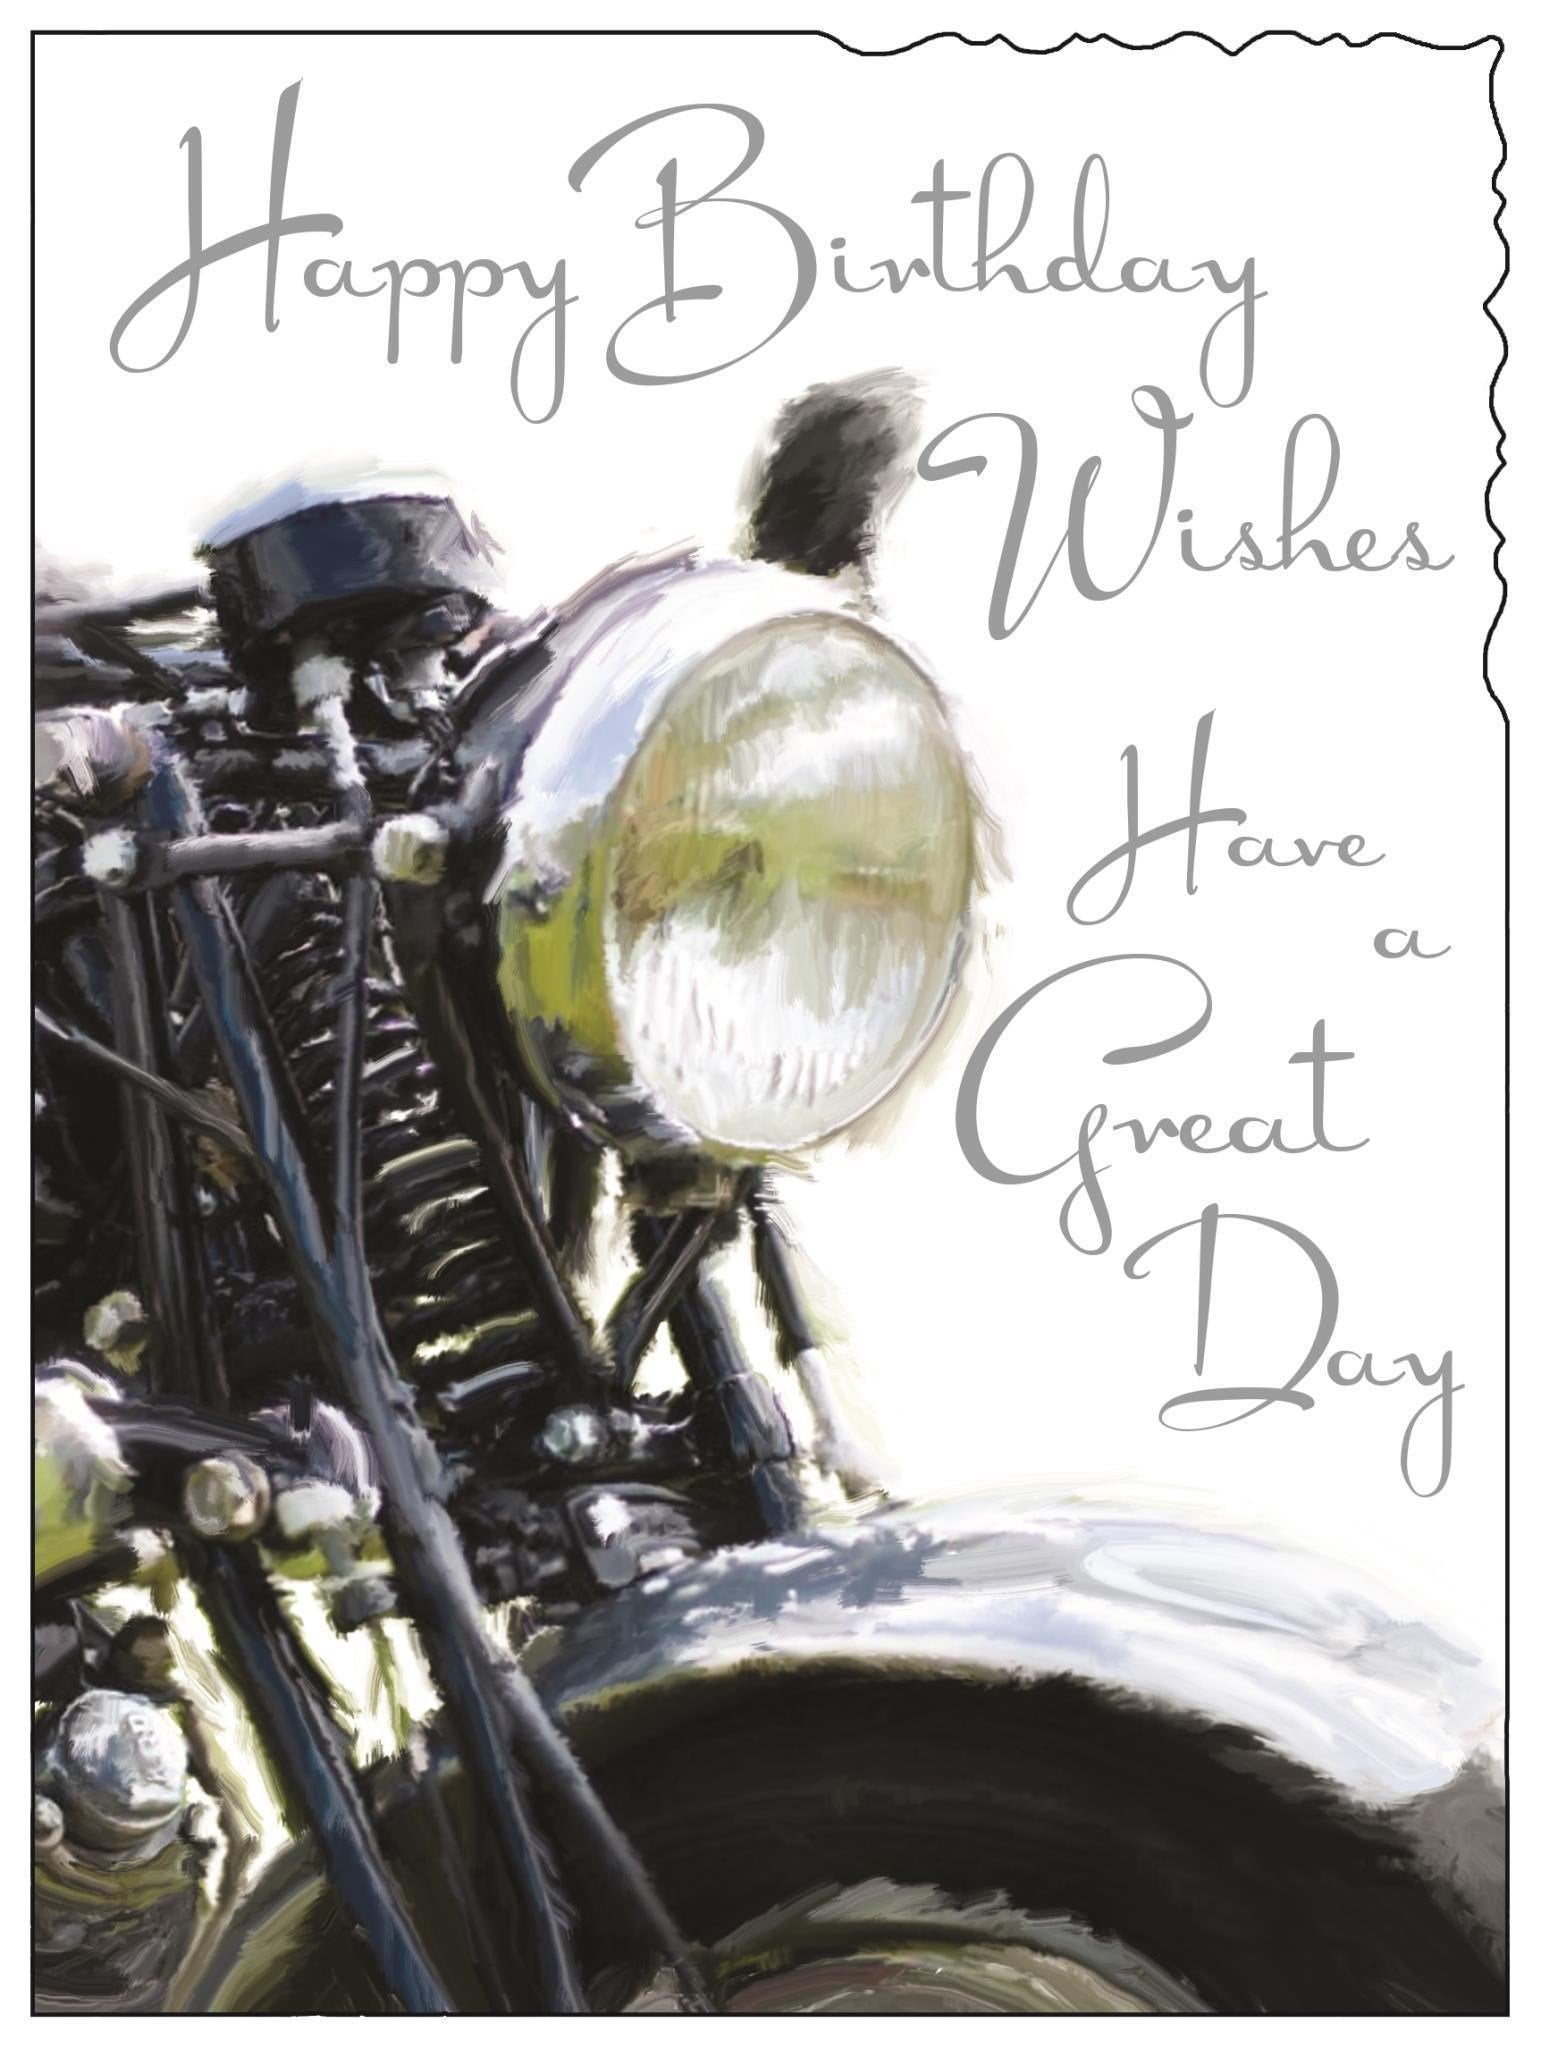 Front of Open Male Birthday Motorbike Greetings Card